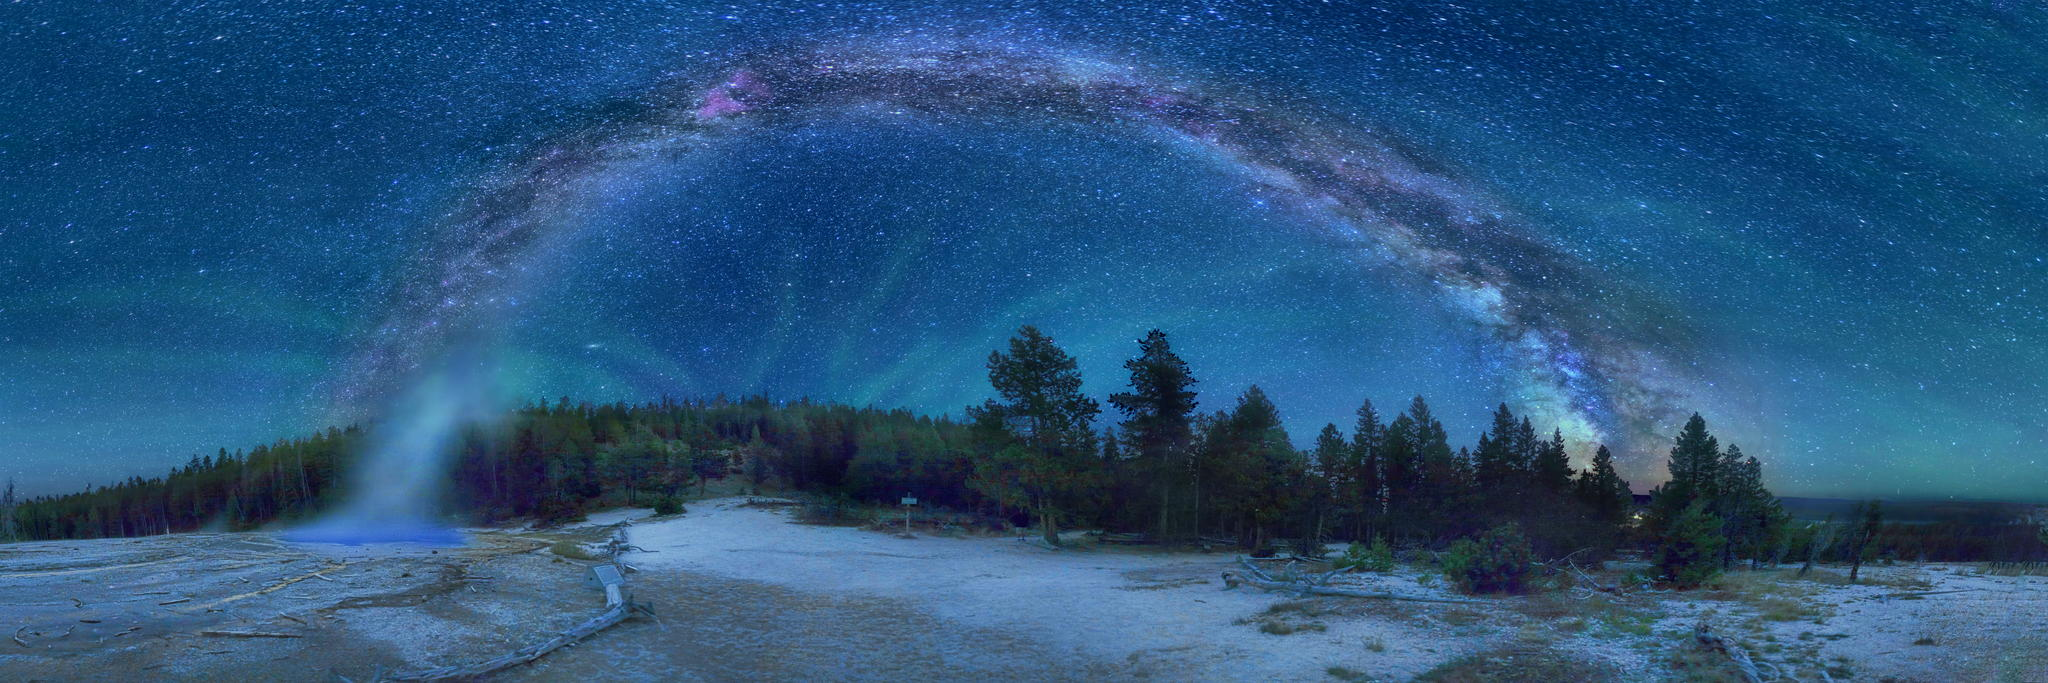 Milky way from Yellowstone Park-17